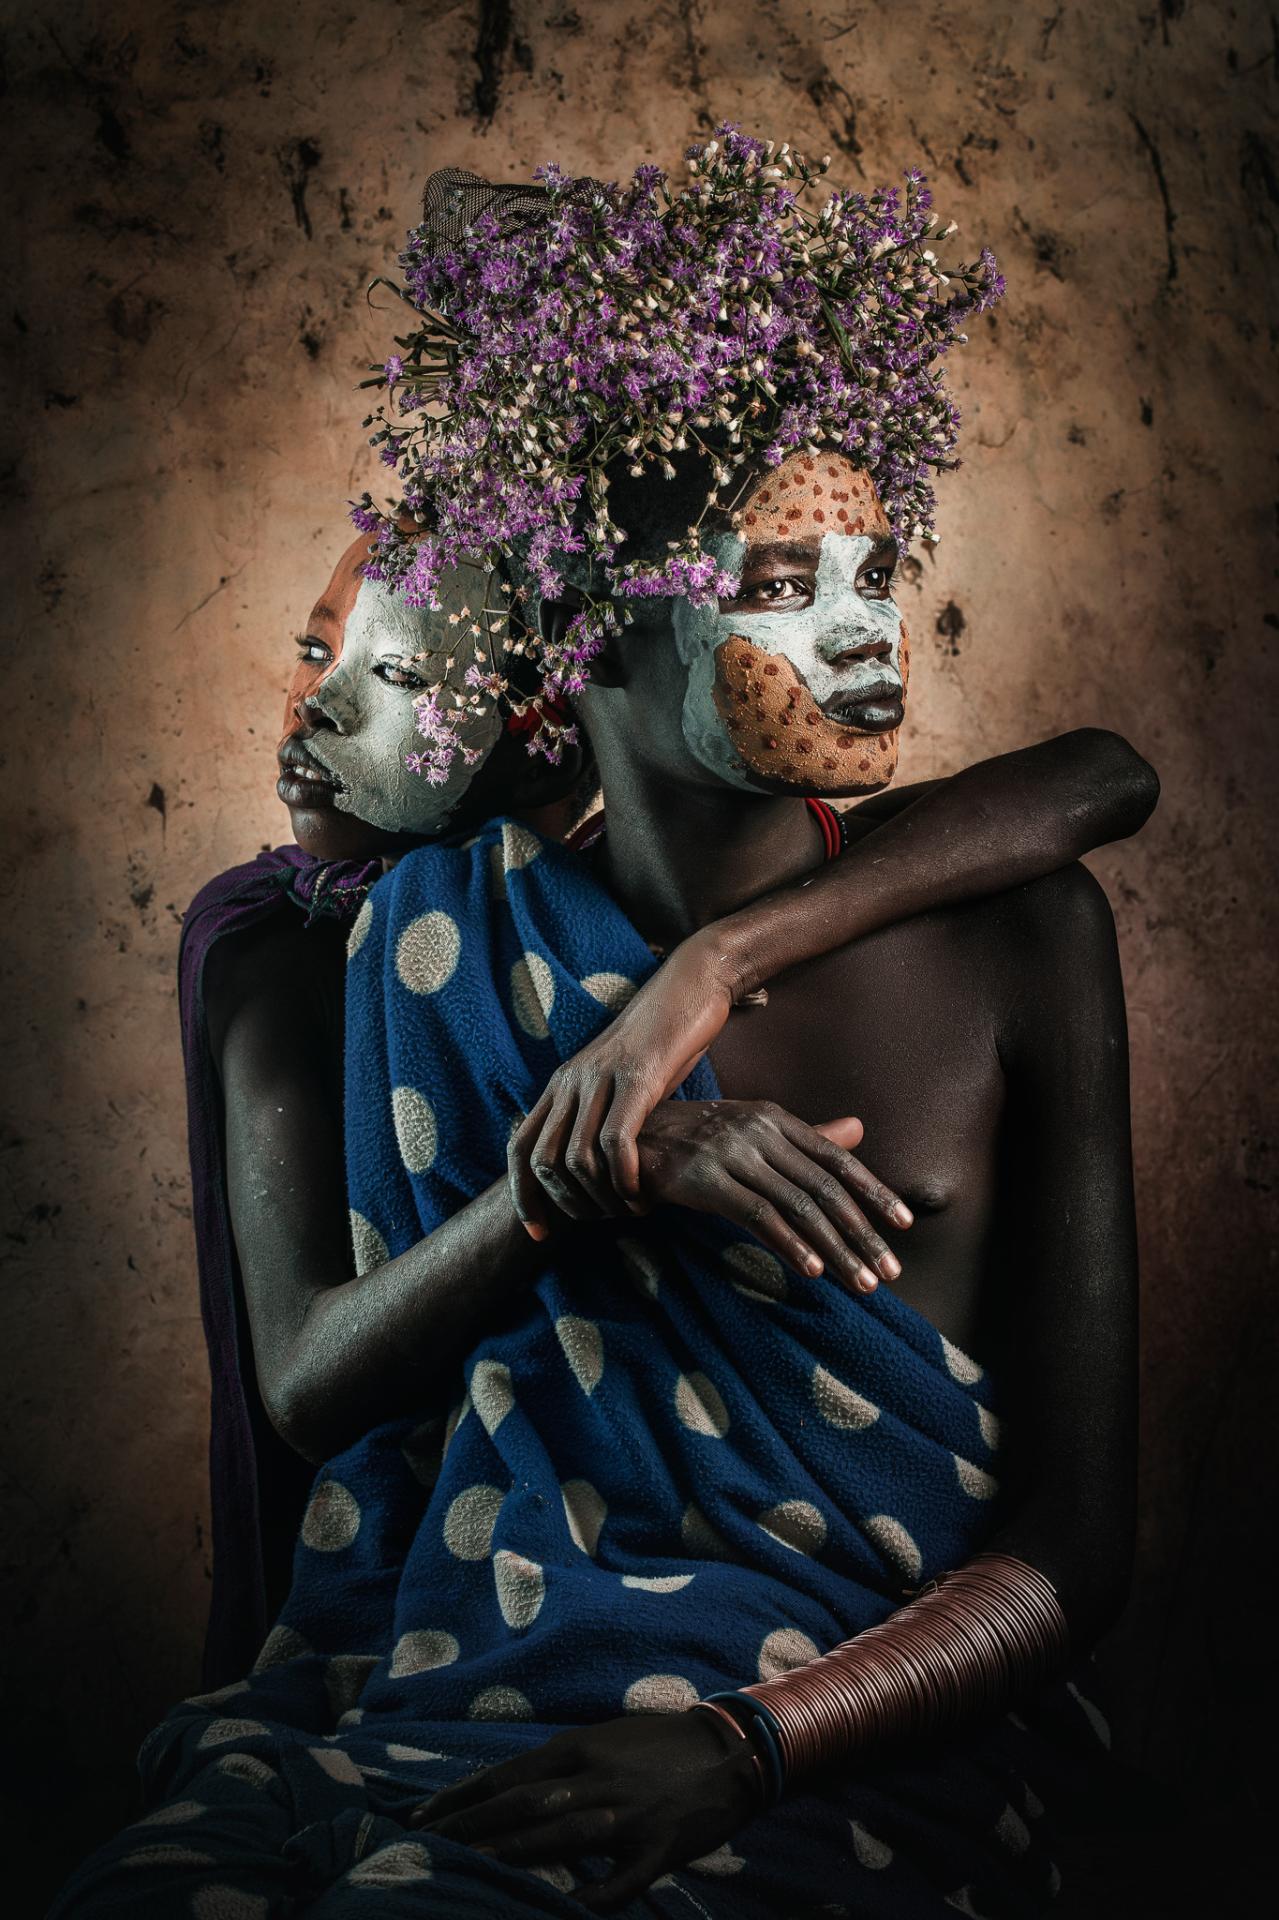 New York Photography Awards Winner - People of the Omo Valley